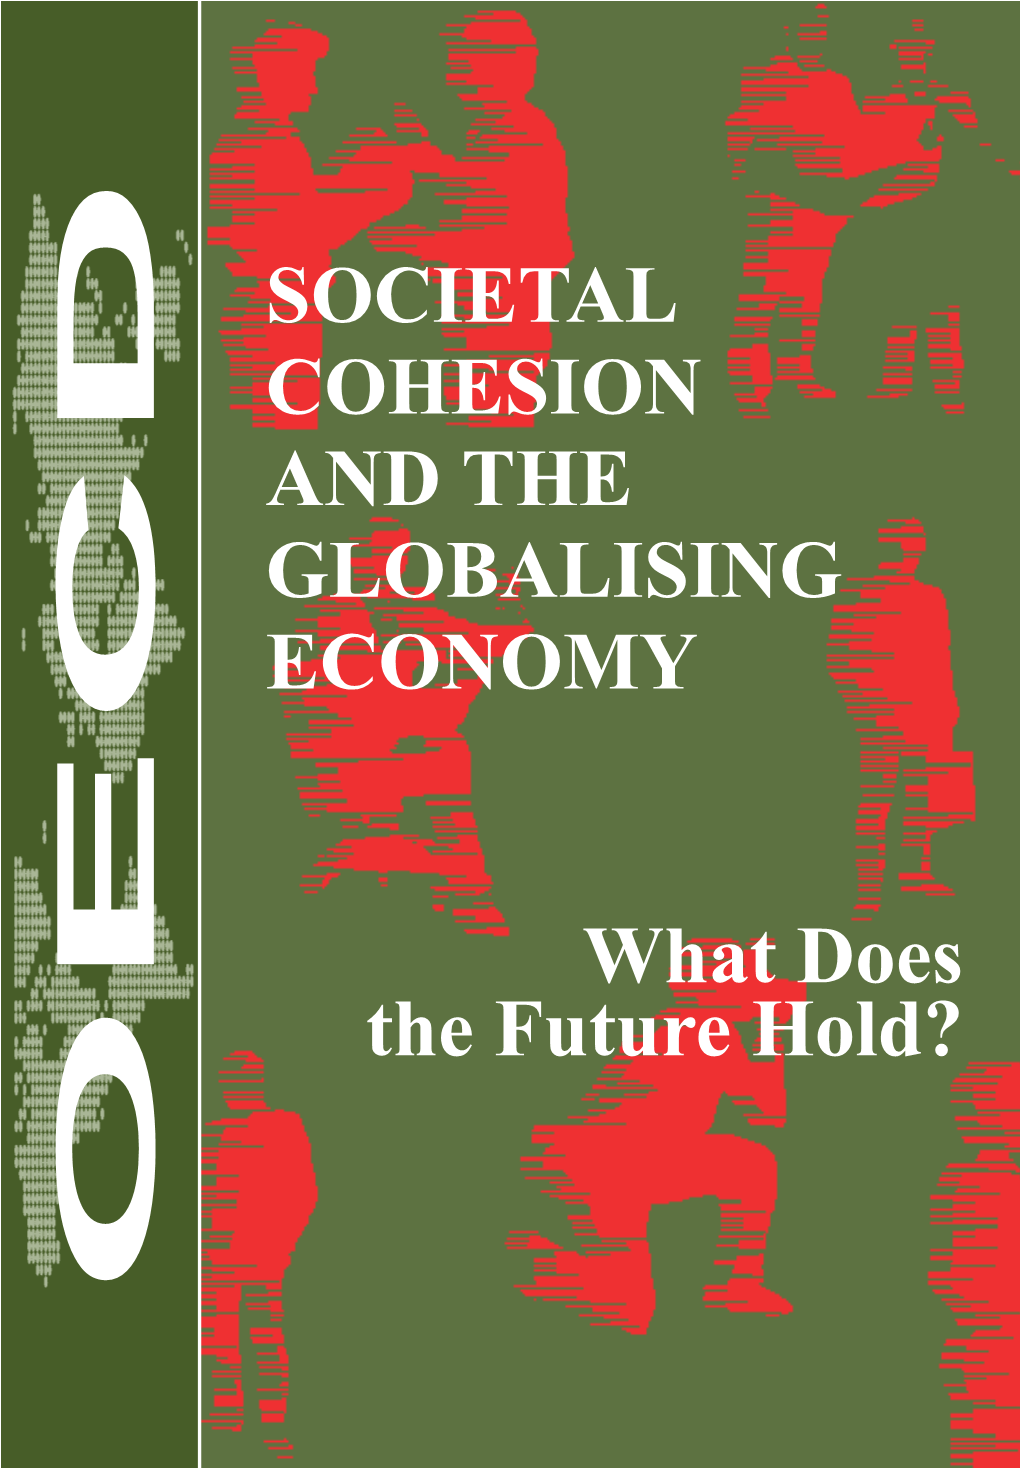 Societal Cohesion and the Globalising Economiy: What Does the Future Hold?